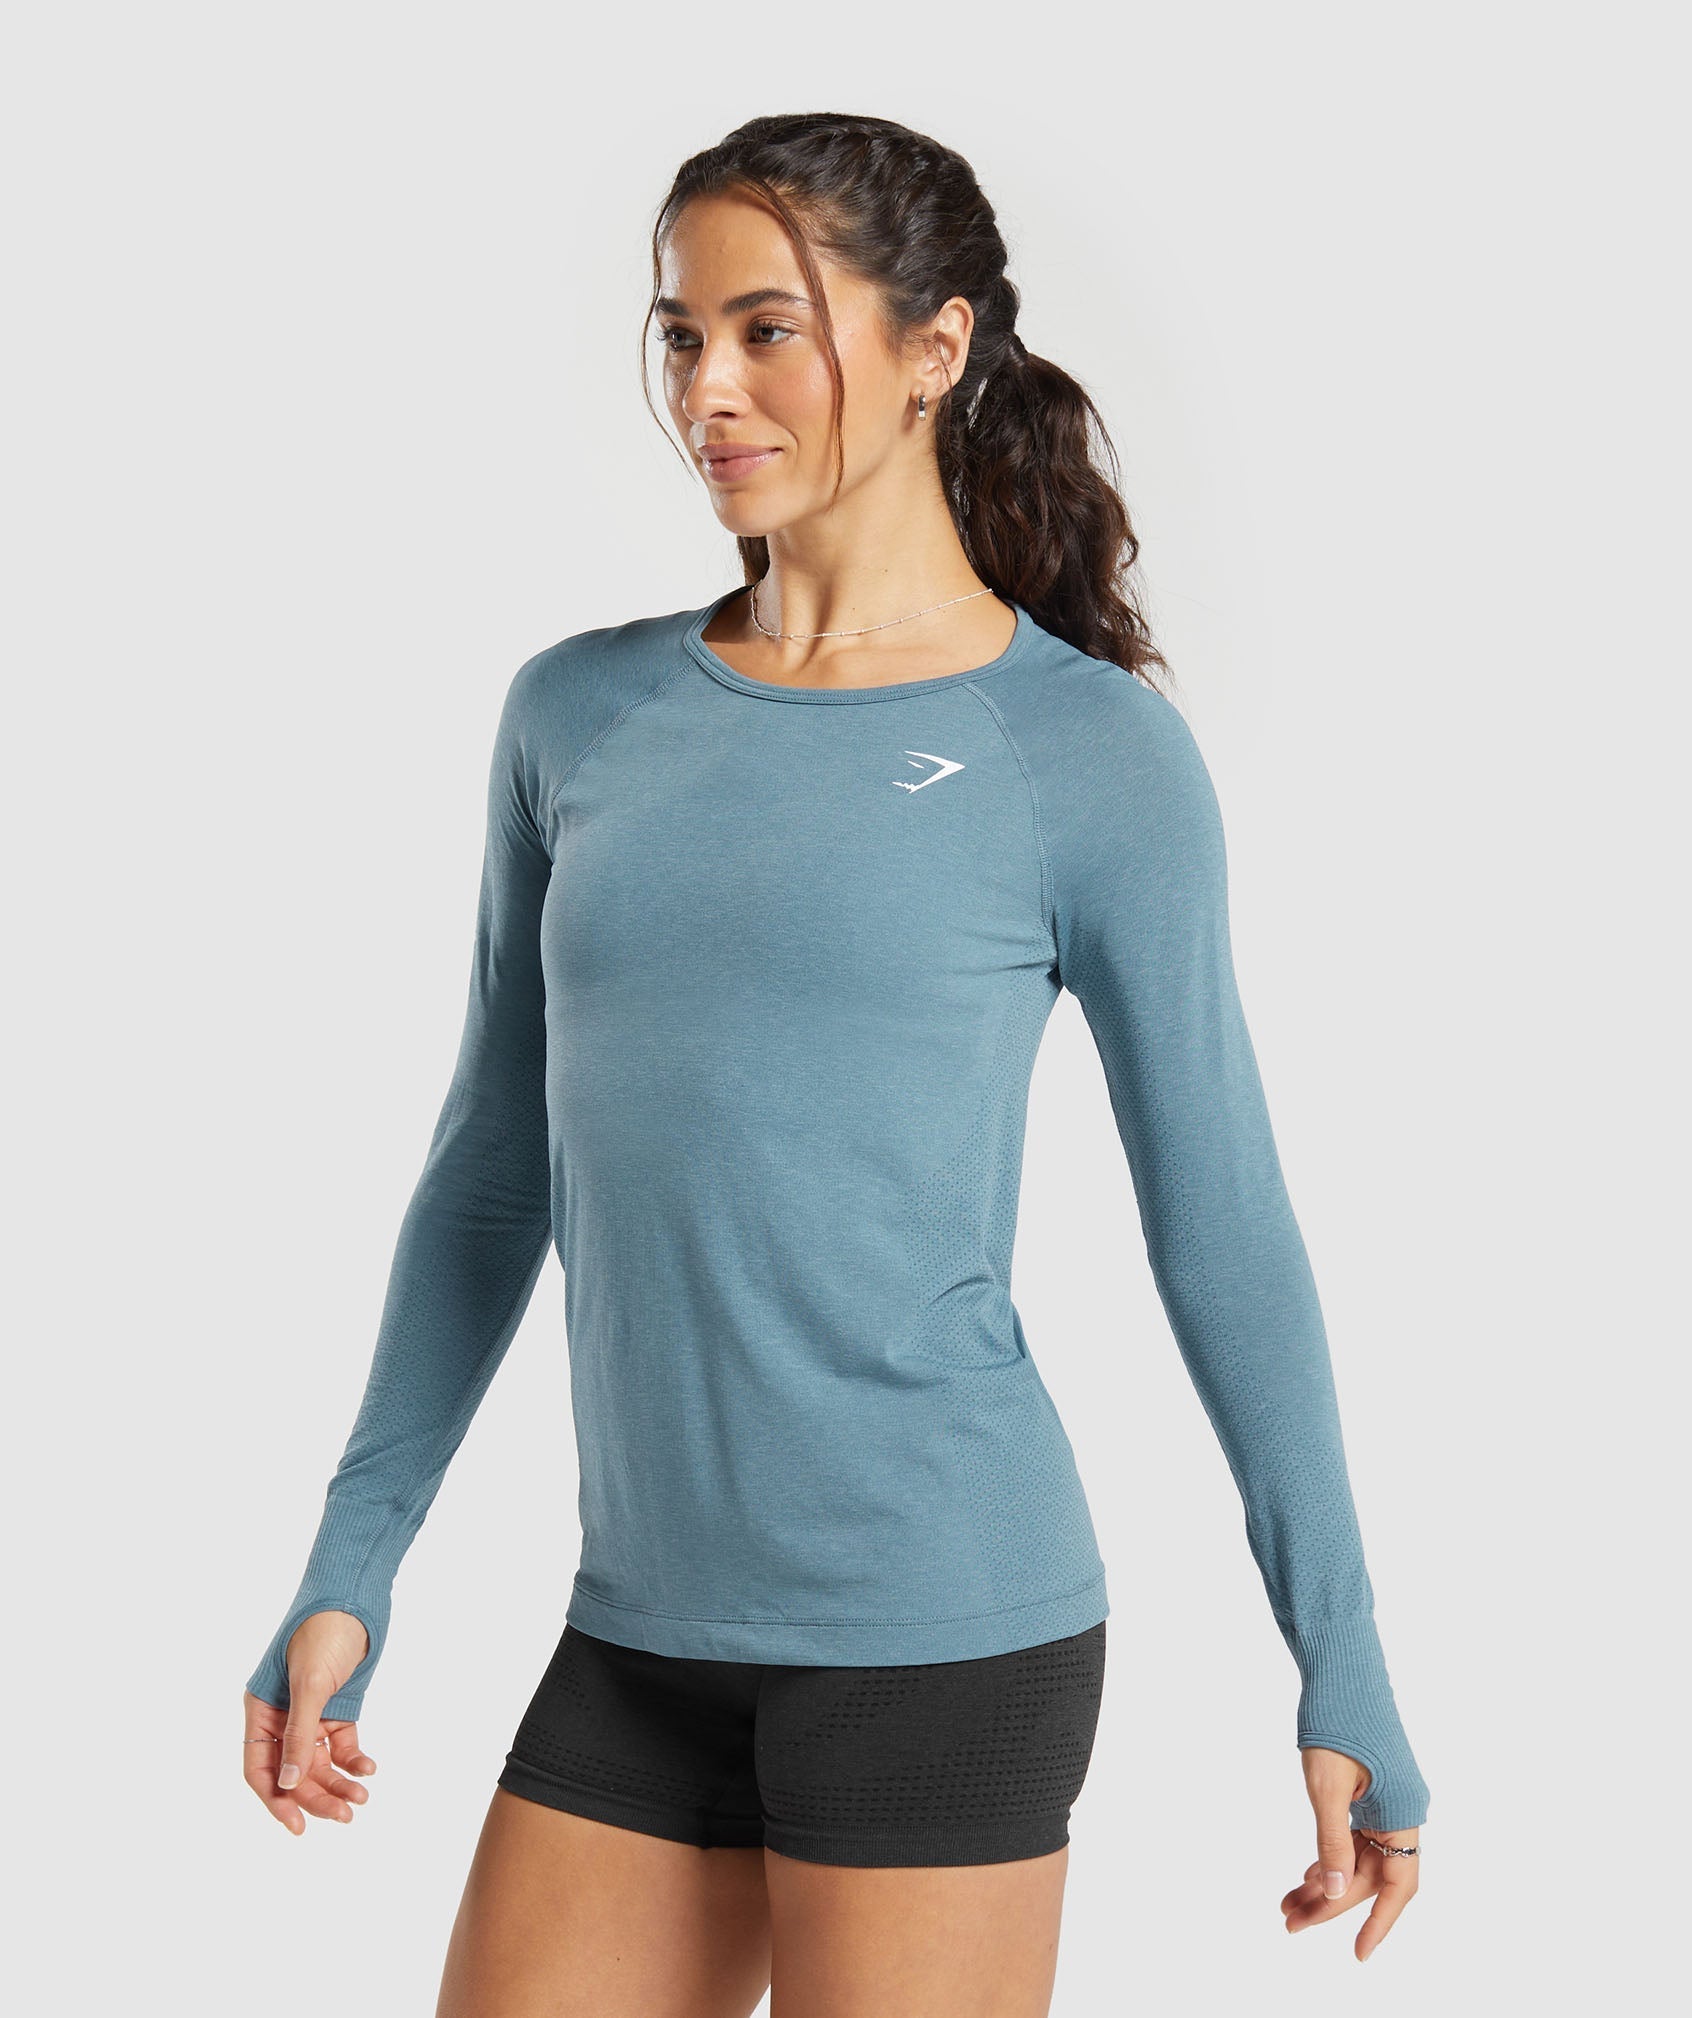 Vital Seamless 2.0 Light Long Sleeve Top in Faded Blue Marl - view 3